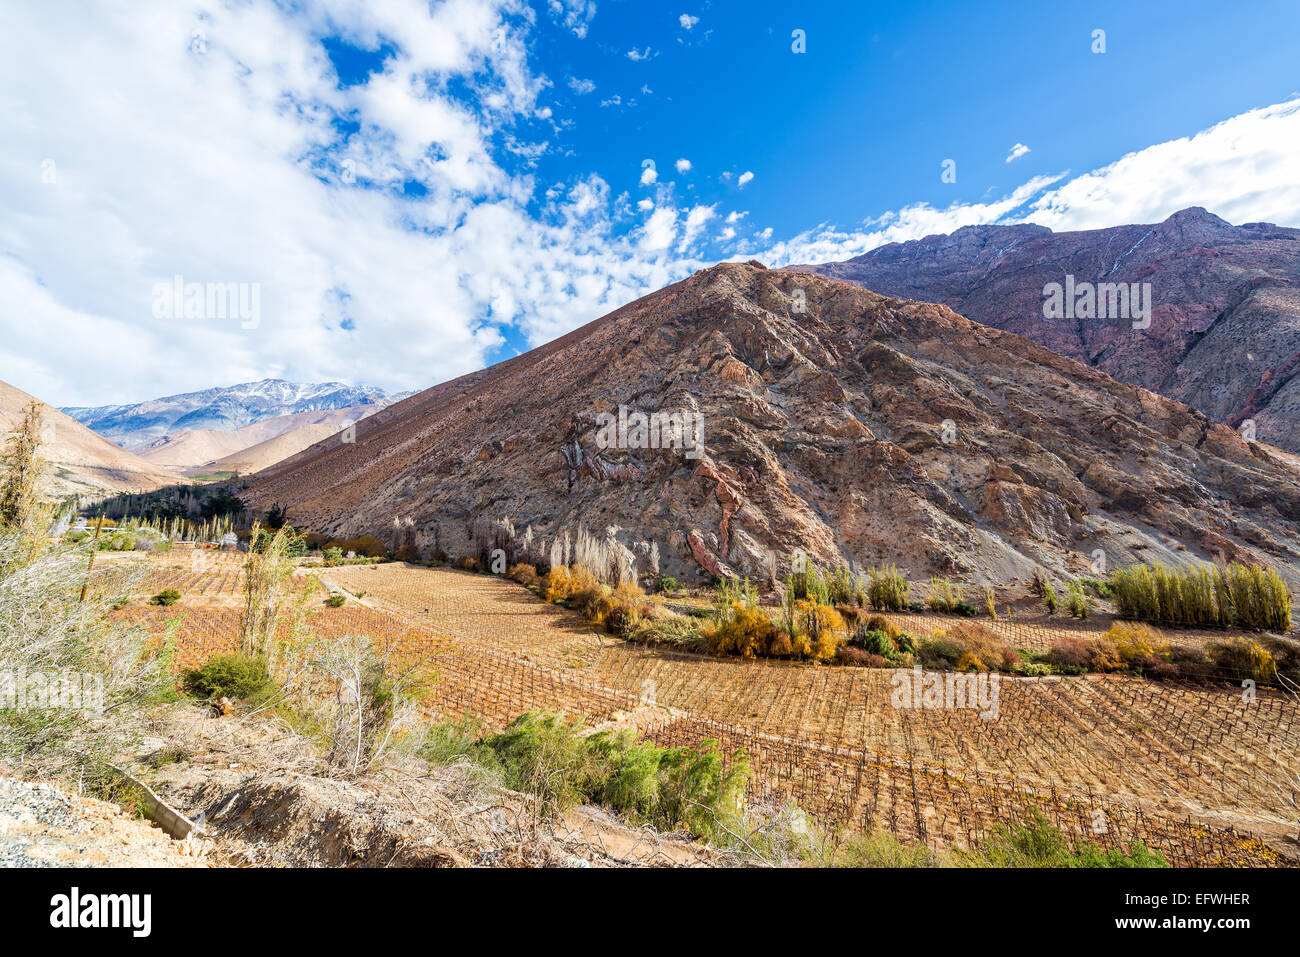 View of the Elqui Valley where a lot of pisco is produced in Chile Stock Photo